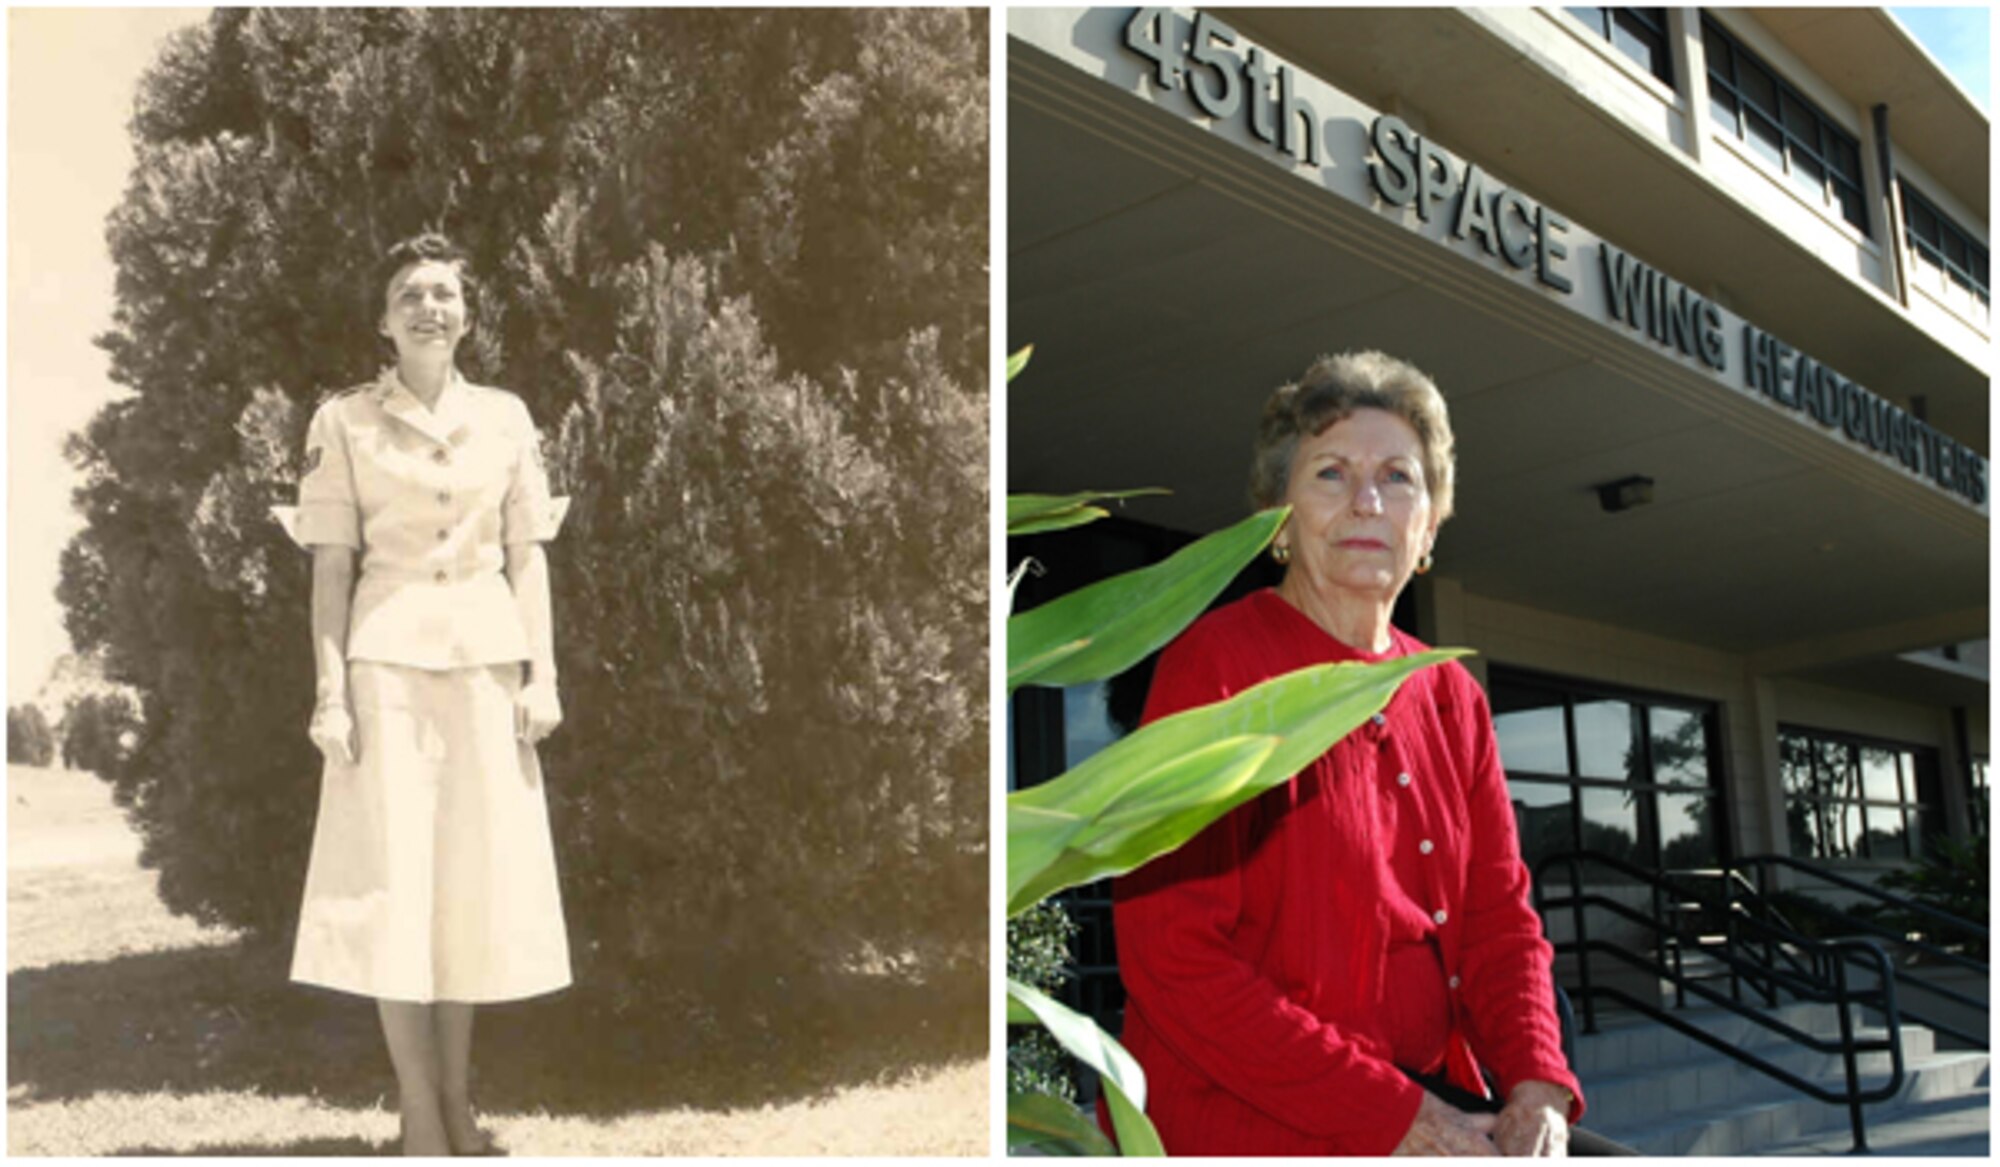 Bettye Krieter in 1953, left, when promoted to Staff Sergeant in the Women in the Air
Force, and in 2008, outside 45th Space Wing Headquarters at Patrick Air Force Base, where she was recognized for 60 years of federal service. She retired Sept. 29, 2011, with a total of 63 years of federal service. (Air Force photos)